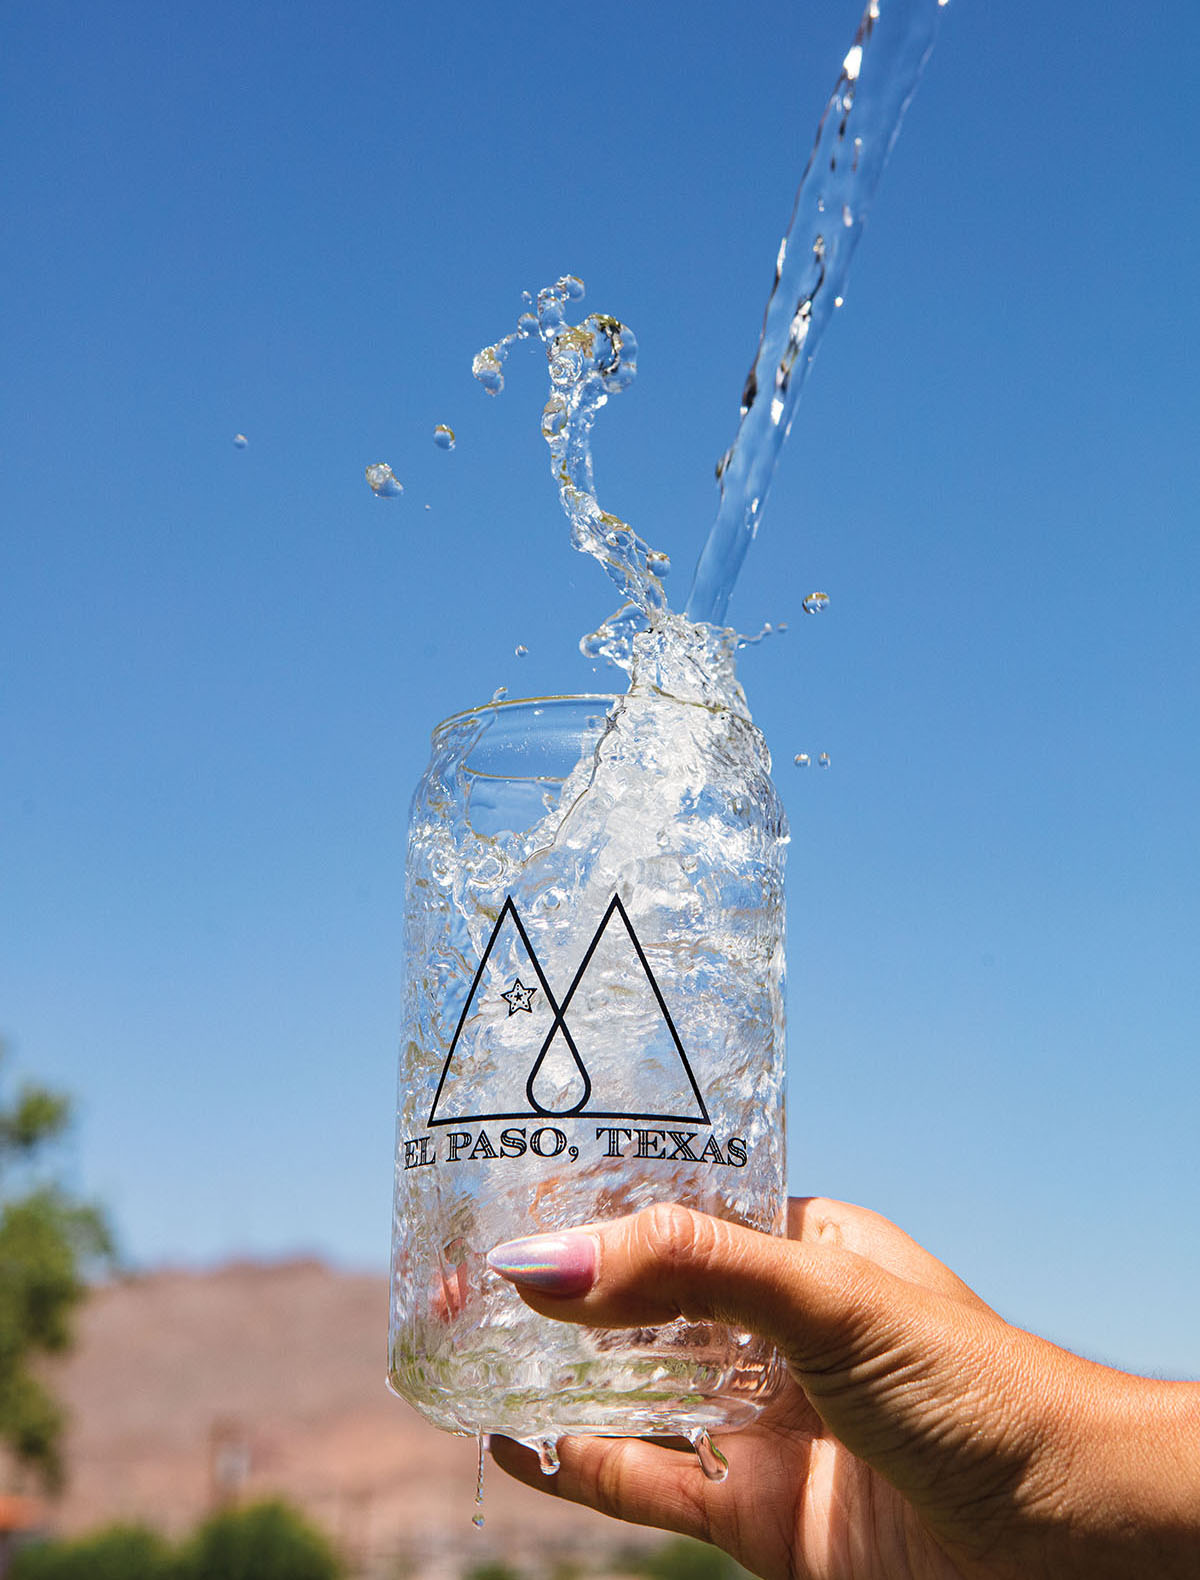 A glass of water from the Desalination Plant in El Paso being splashed